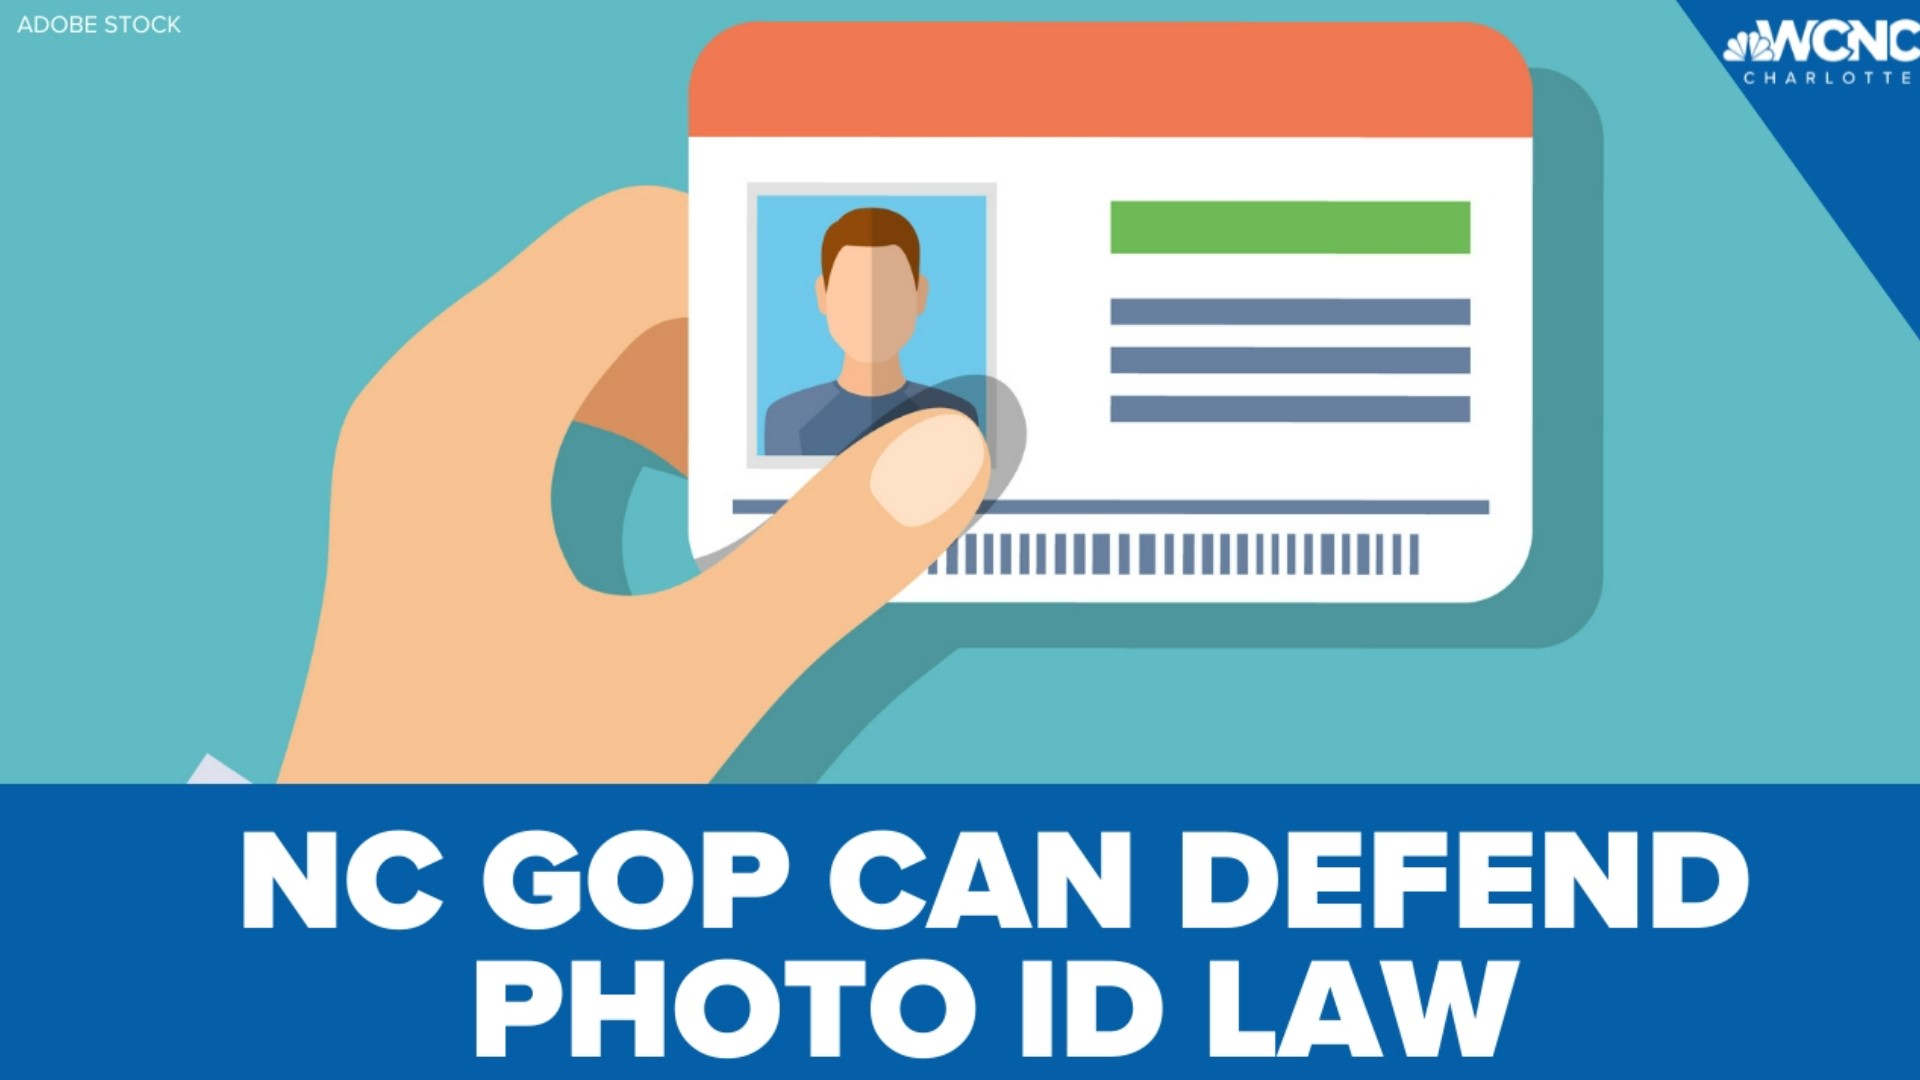 North Carolina Republicans could possibly end up defending the State's voter ID law in court. The Supreme Court ruled on the decision 8-1 today.